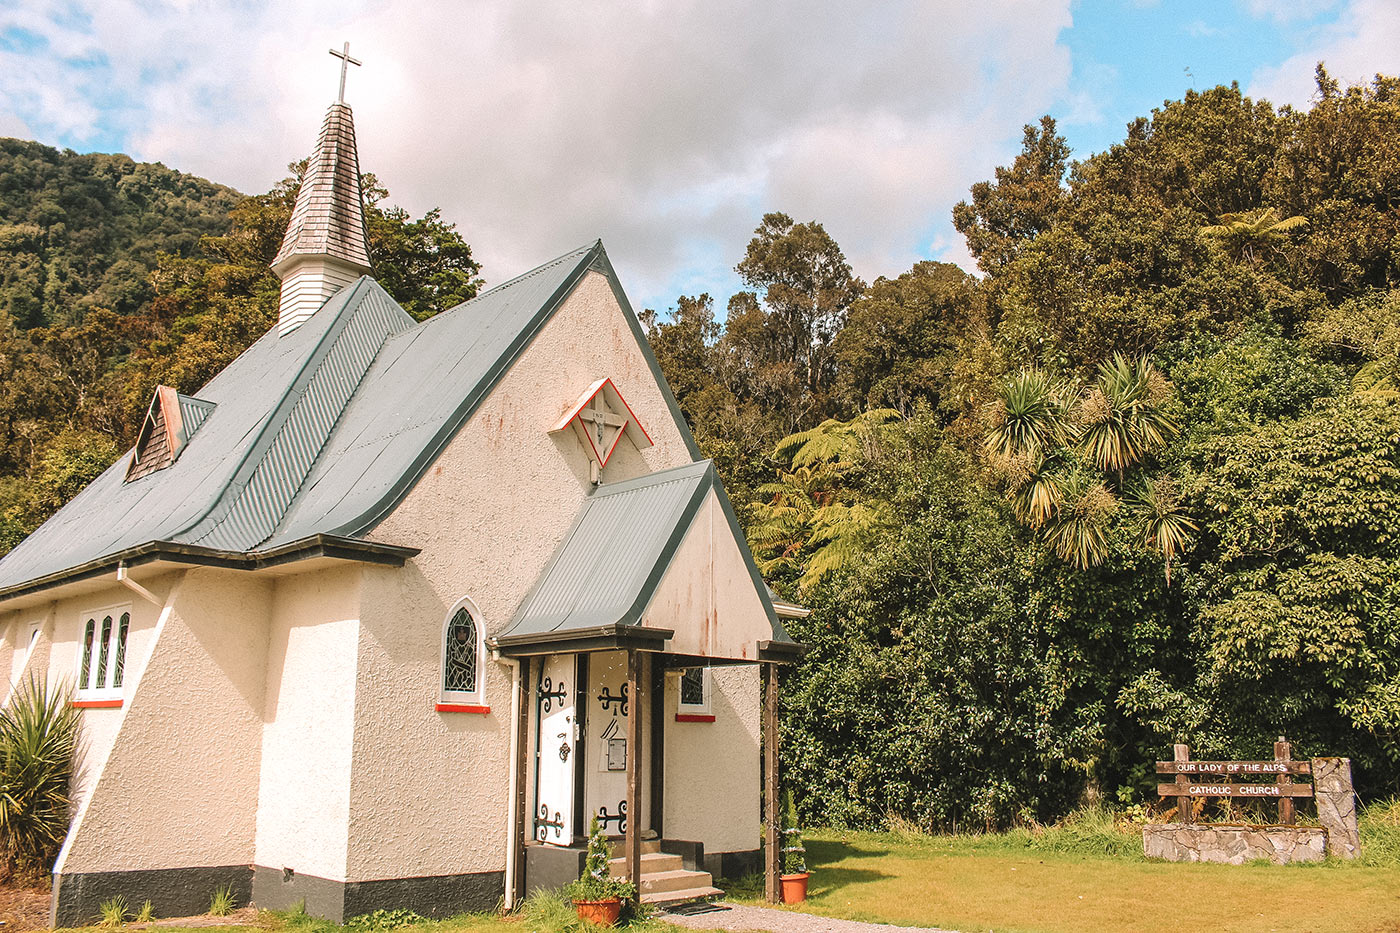 Our Lady of the Alps Catholic Church Franz Josef New Zealand